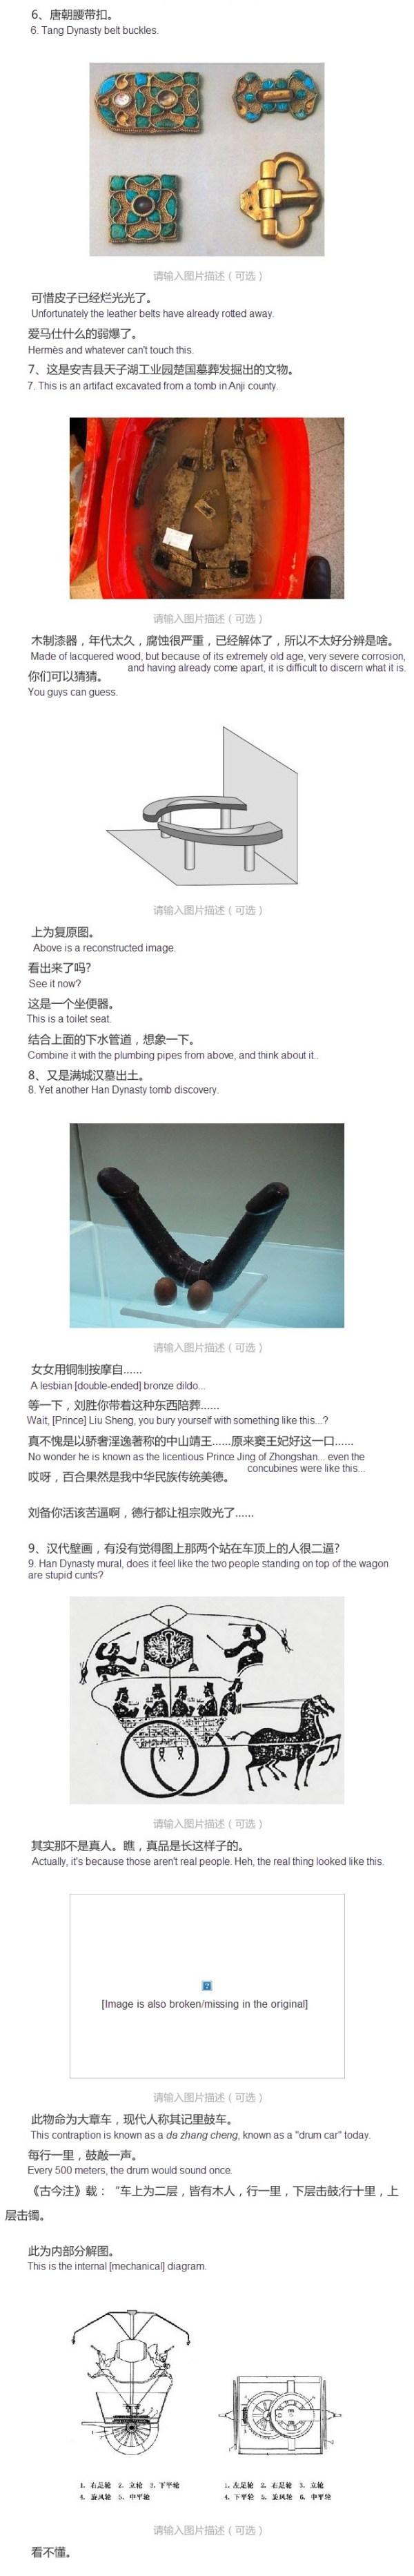 15-ancient-chinese-inventions-that-were-ahead-of-their-time-part-3.jpg